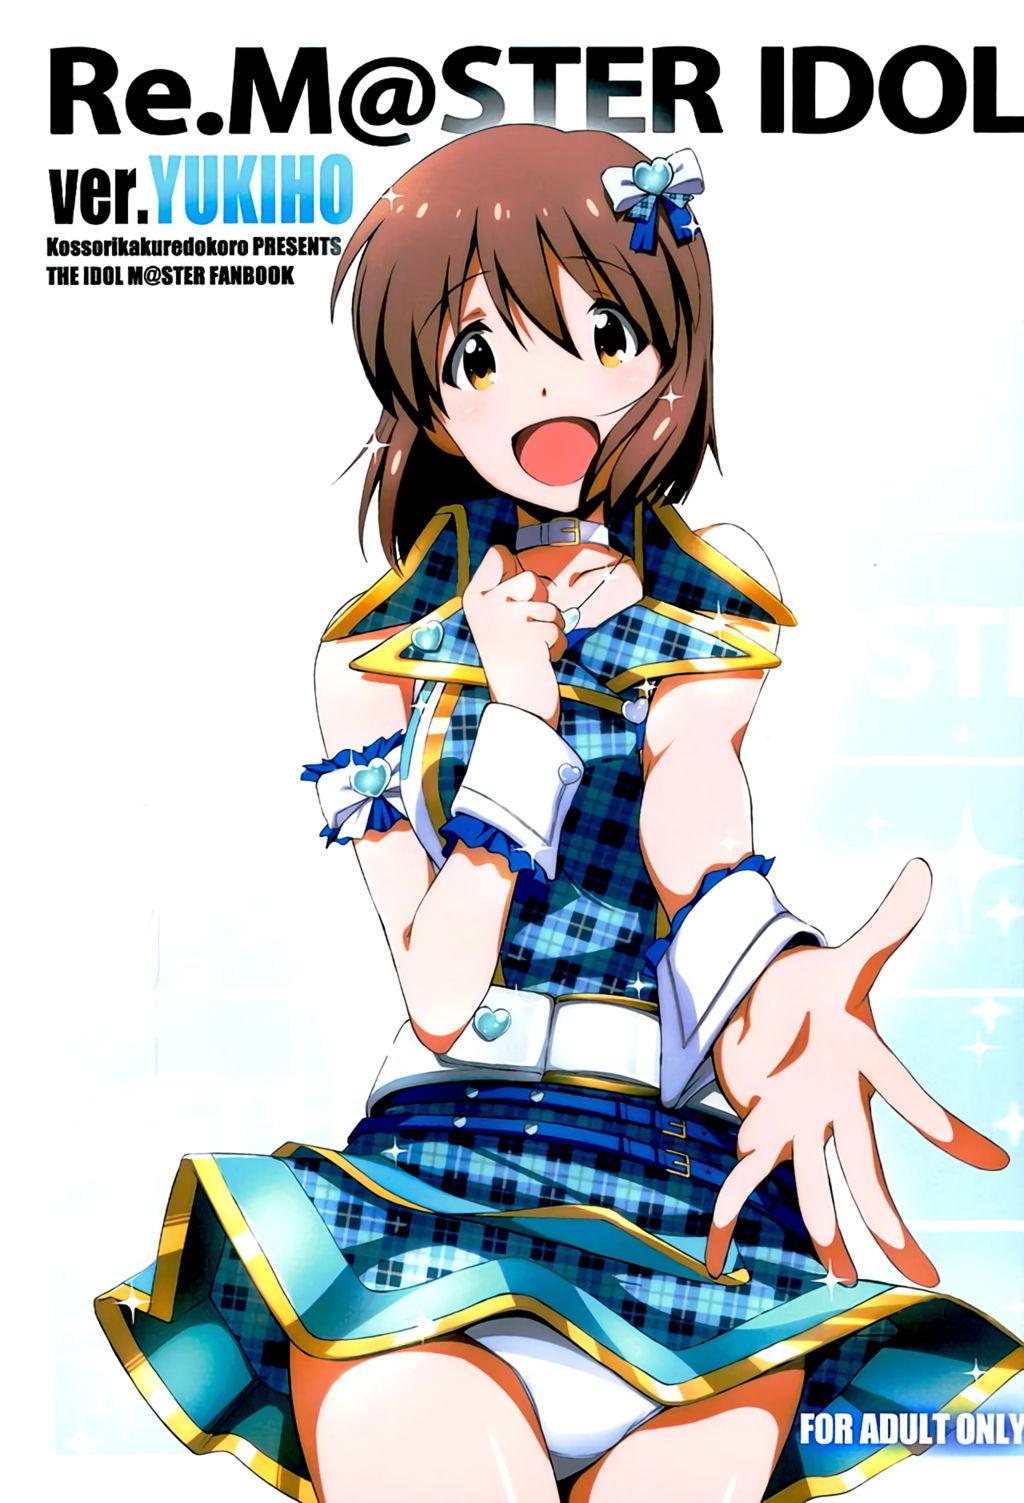 Jerkoff Re:M@STER IDOL ver.YUKIHO - The idolmaster Slutty - Picture 2